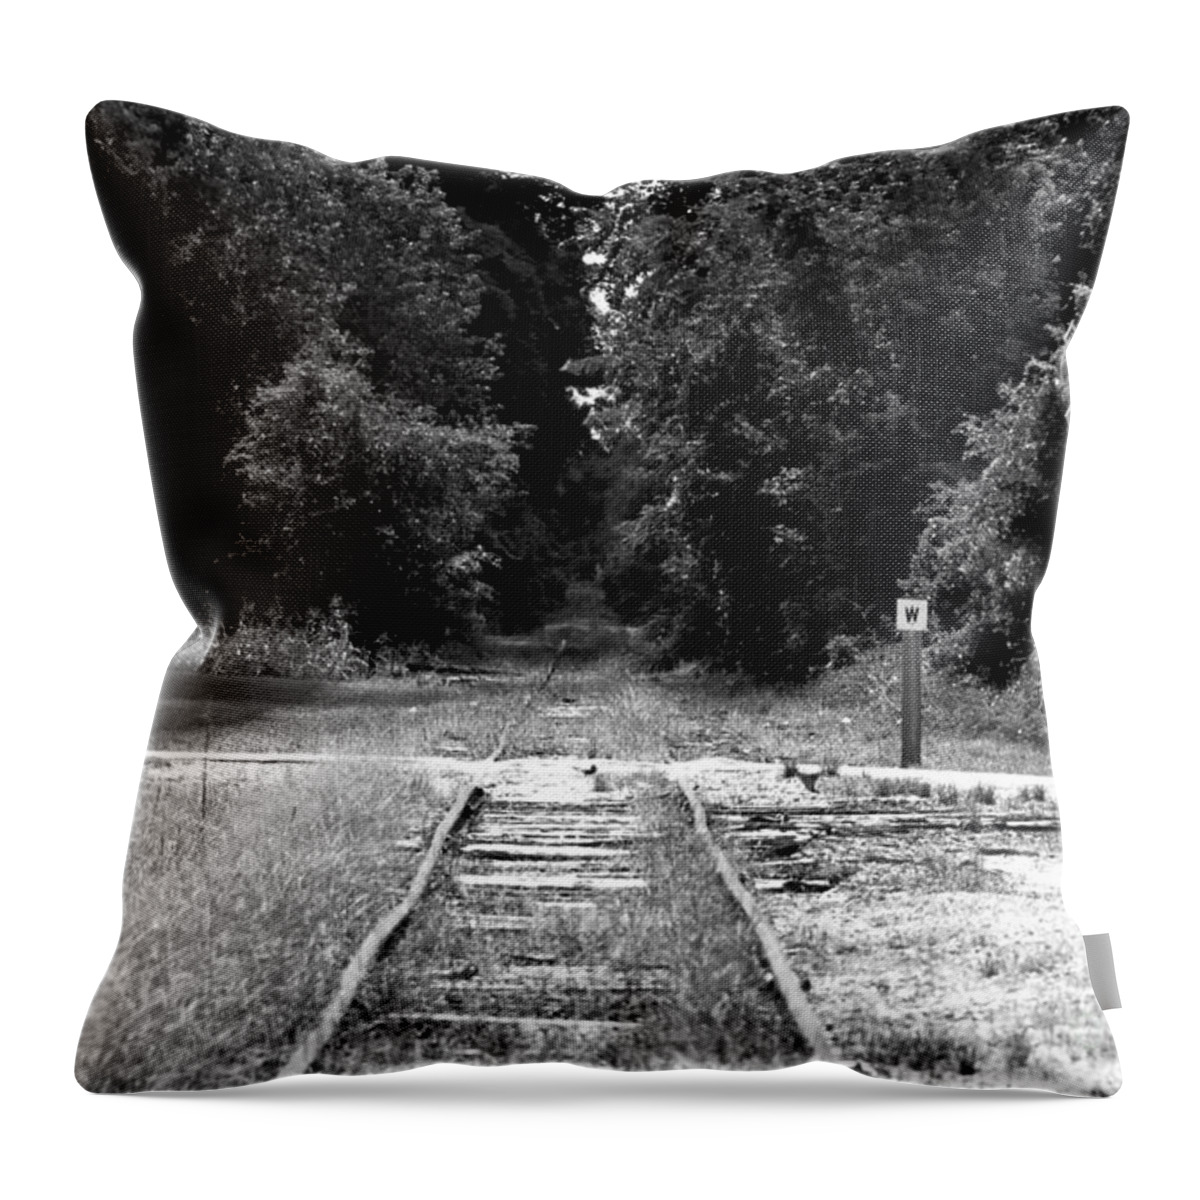 Railroad Throw Pillow featuring the photograph Abandoned Rails by John Black